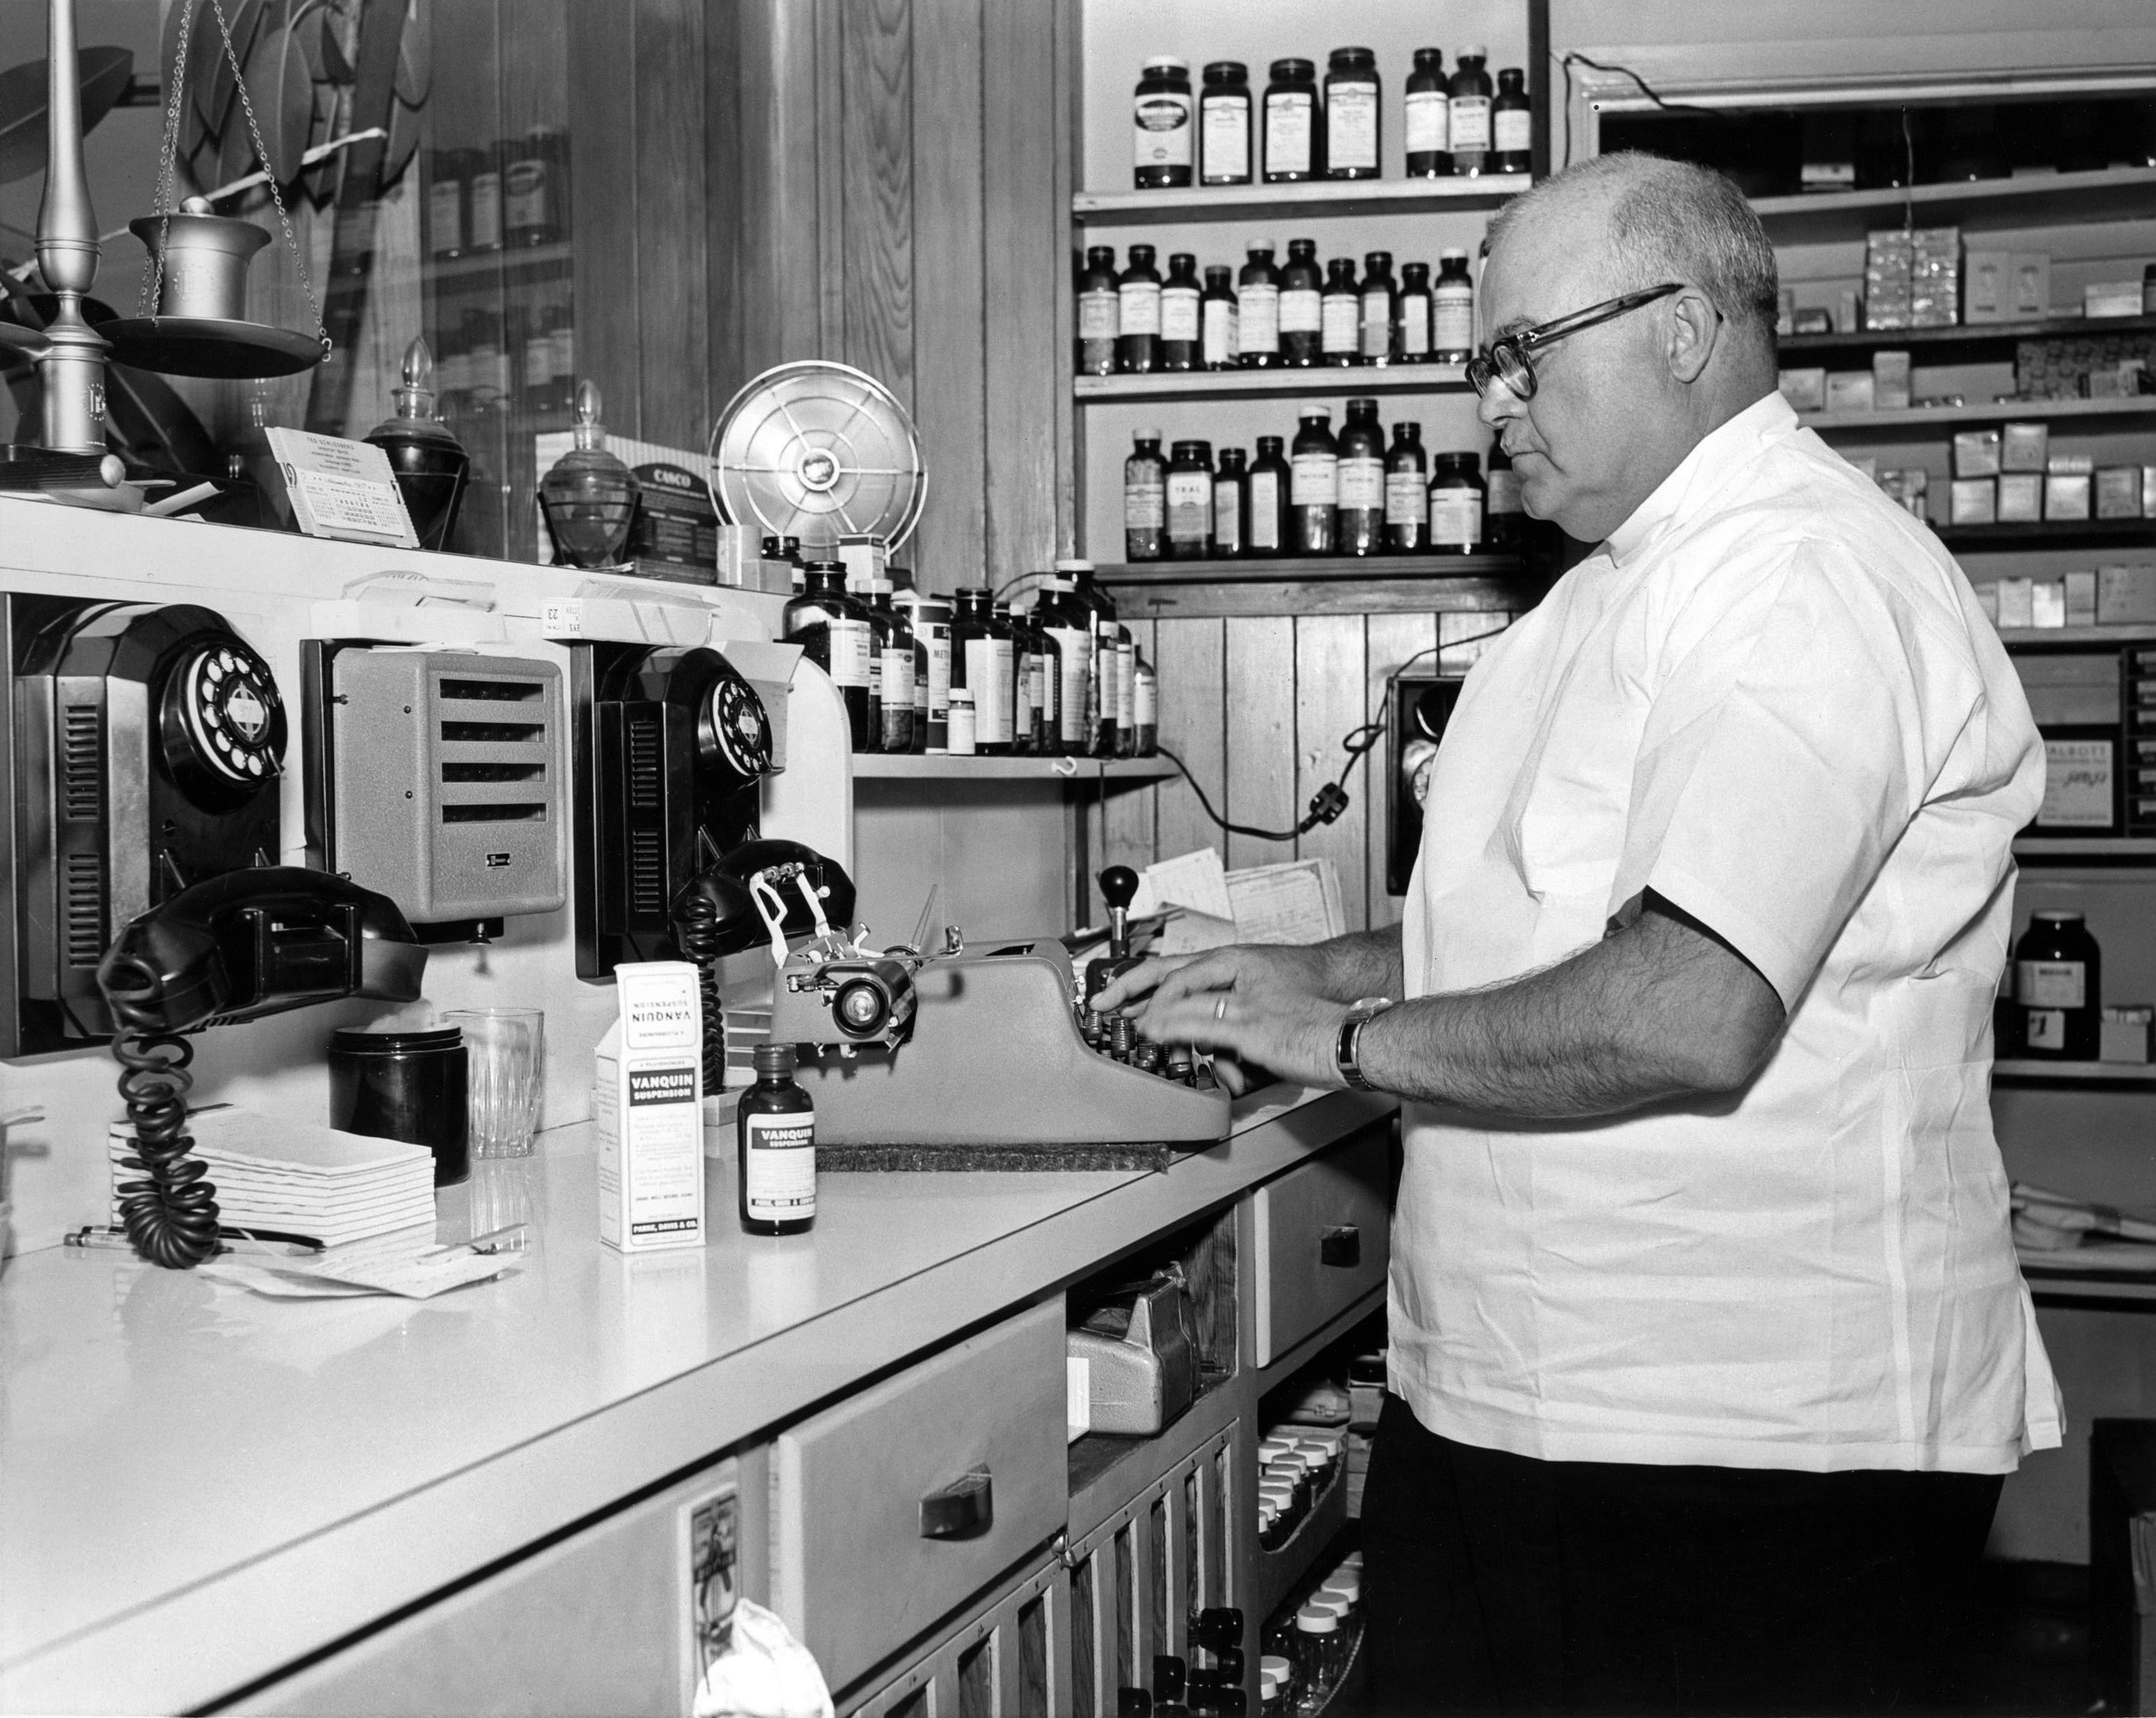 I purchased this 8 x 10 print at the swap meet. On the back is printed:

Mr. Cliff McCorkle, proprietor and pharmacist of the 101 Broadway Pharmacy, Richmond, Calif., preparing a prescription. 5 November 1957. Photographer: Pfc. Barbara A. Warner, Sixth US Army Photo Lab, Presidio of San Francisco, Calif. Official US Army photograph. View full size.